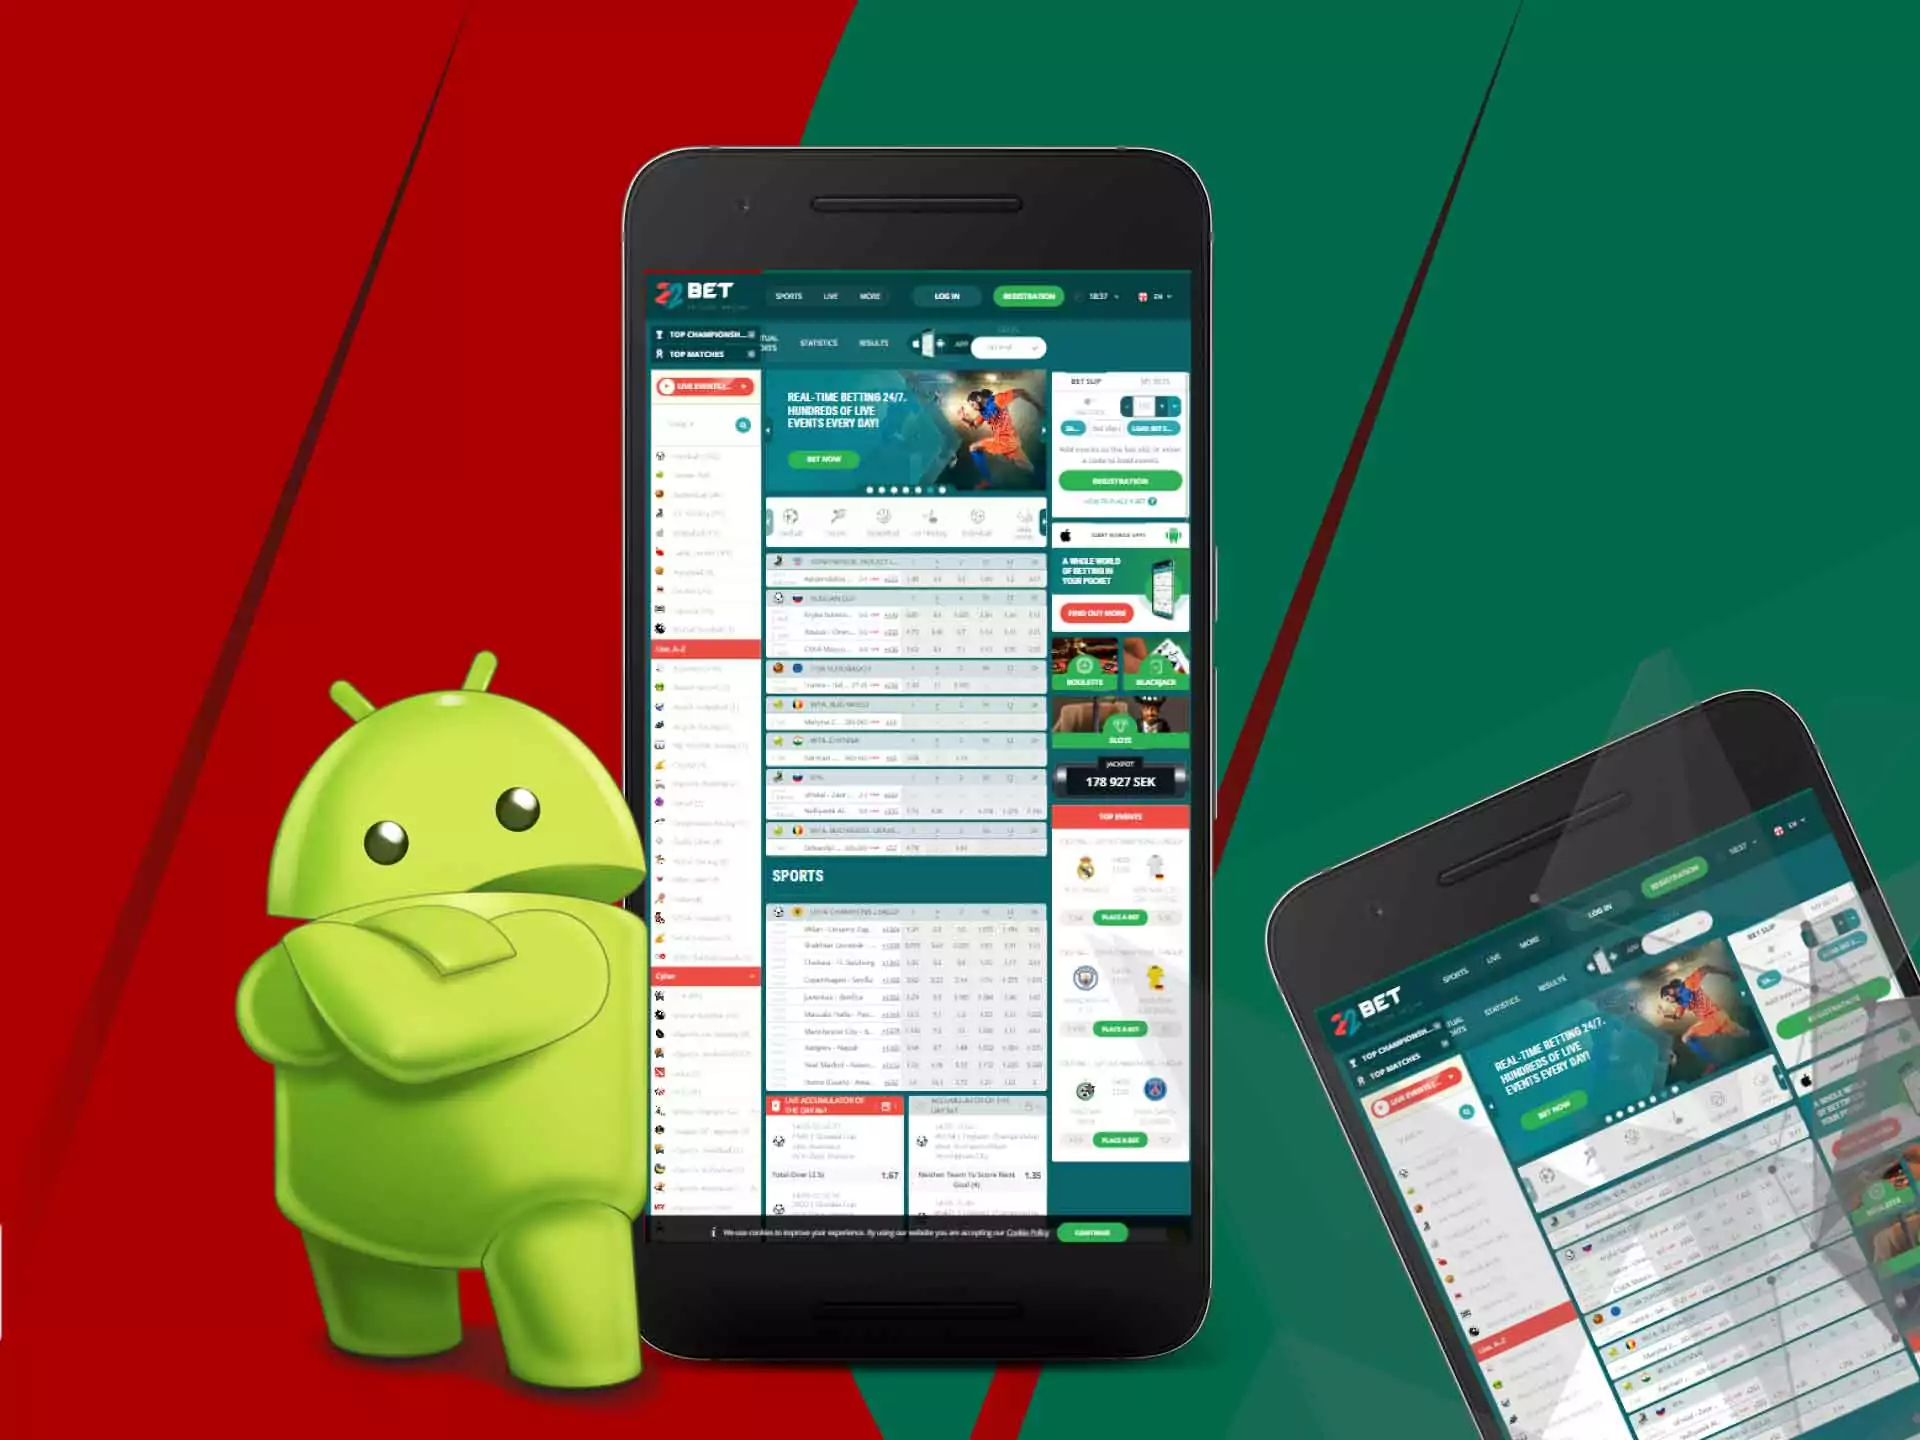 You can install 22Bet app on your Android smartphone with no problems.